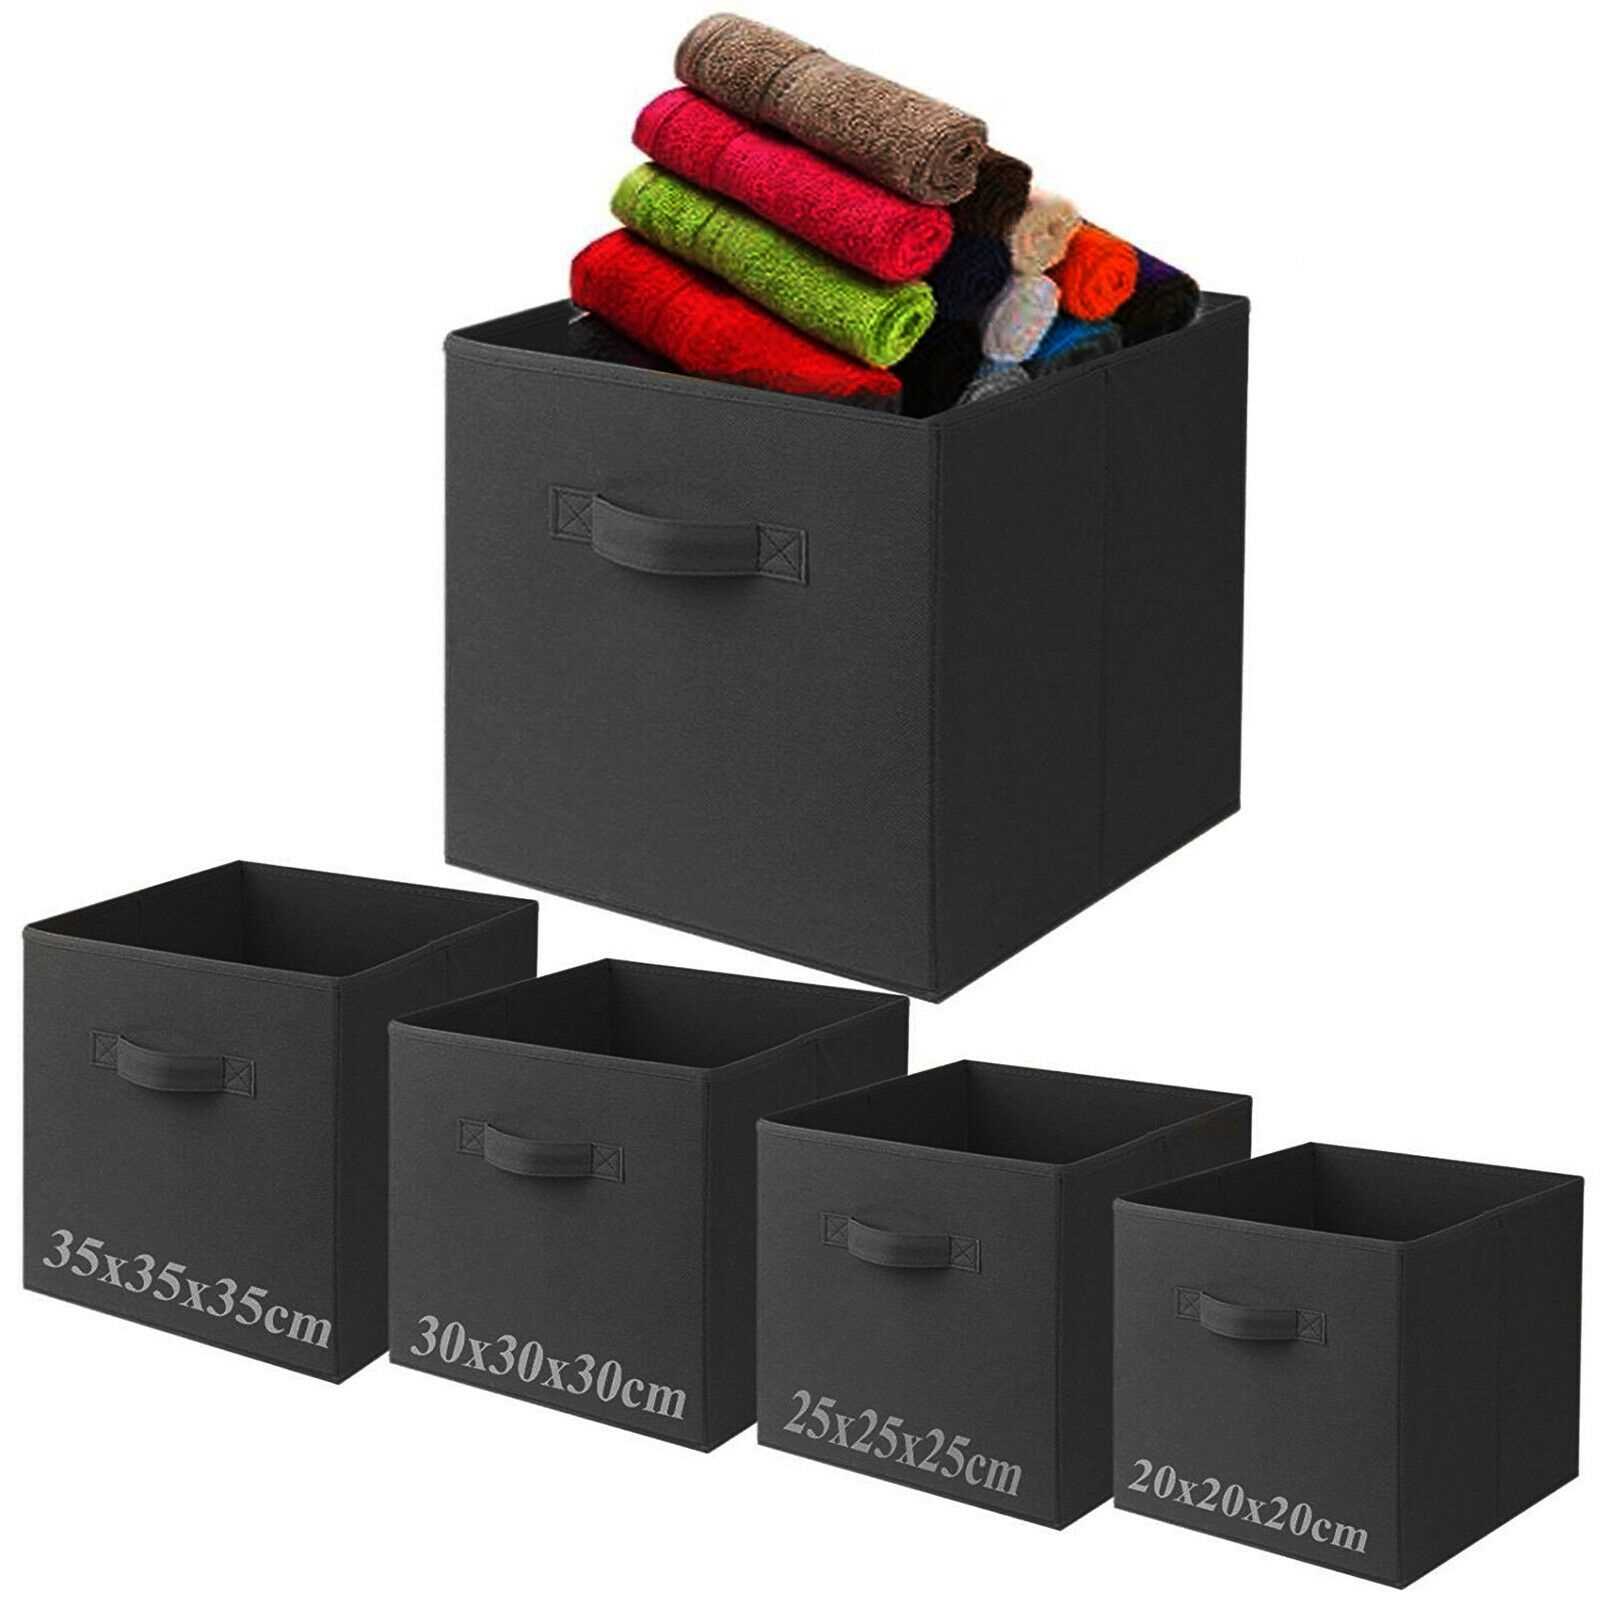 Black Small Square Foldable Canvas Storage Collapsible Folding Box Fabric Kids Cubes Toys